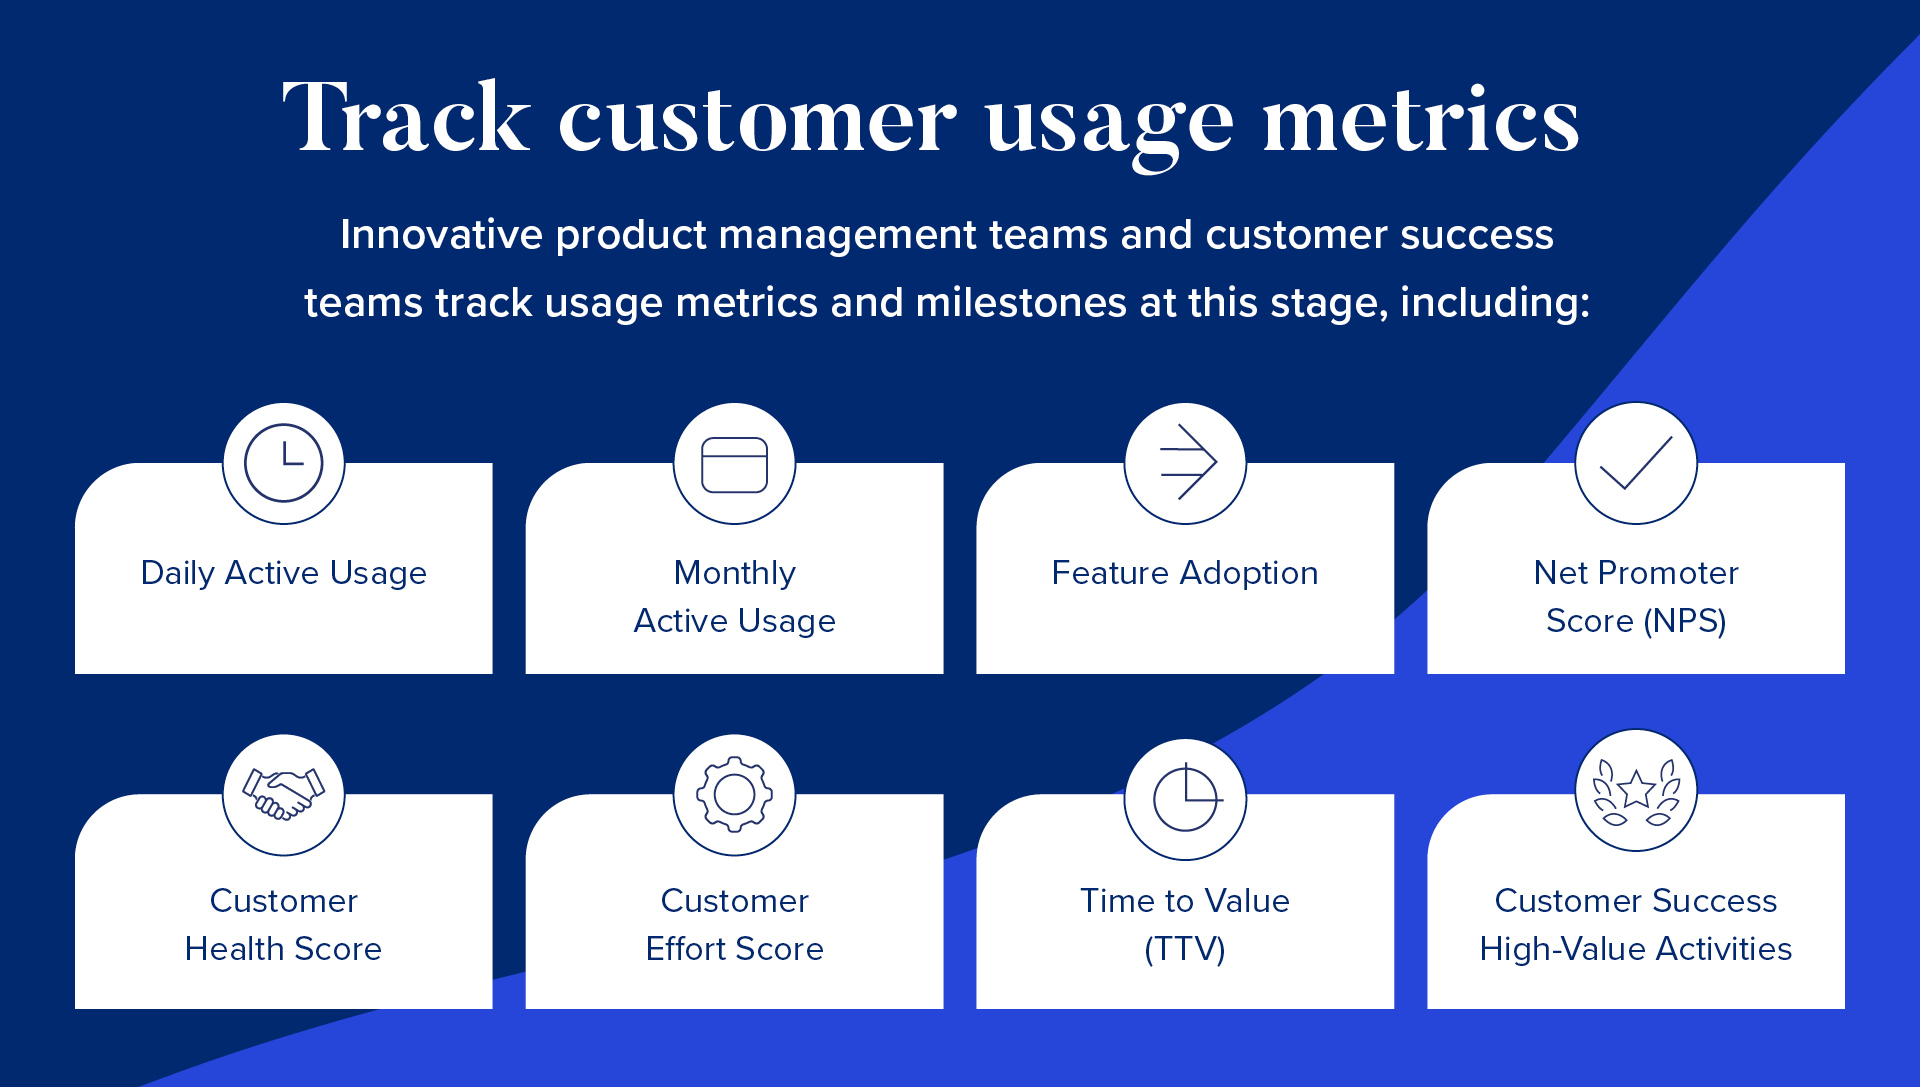 Track customer usage metrics: daily active usage, monthly active usage, feature adoption, net promoter score (NPS), customer health score, customer effort score, time to value (TTV), customer success high-value activities 